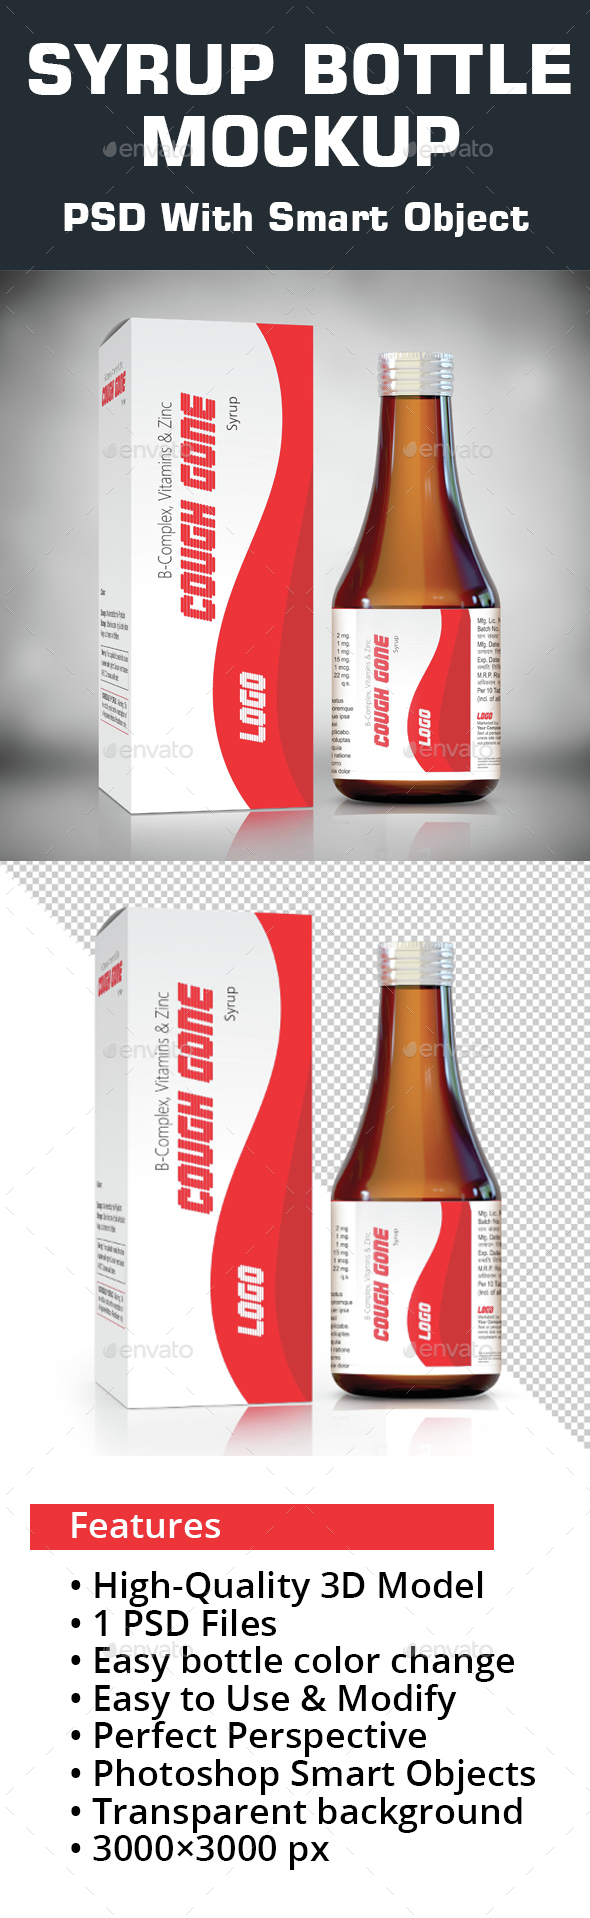 Download Syrup Bottle Mockup By Jumpingideas Graphicriver